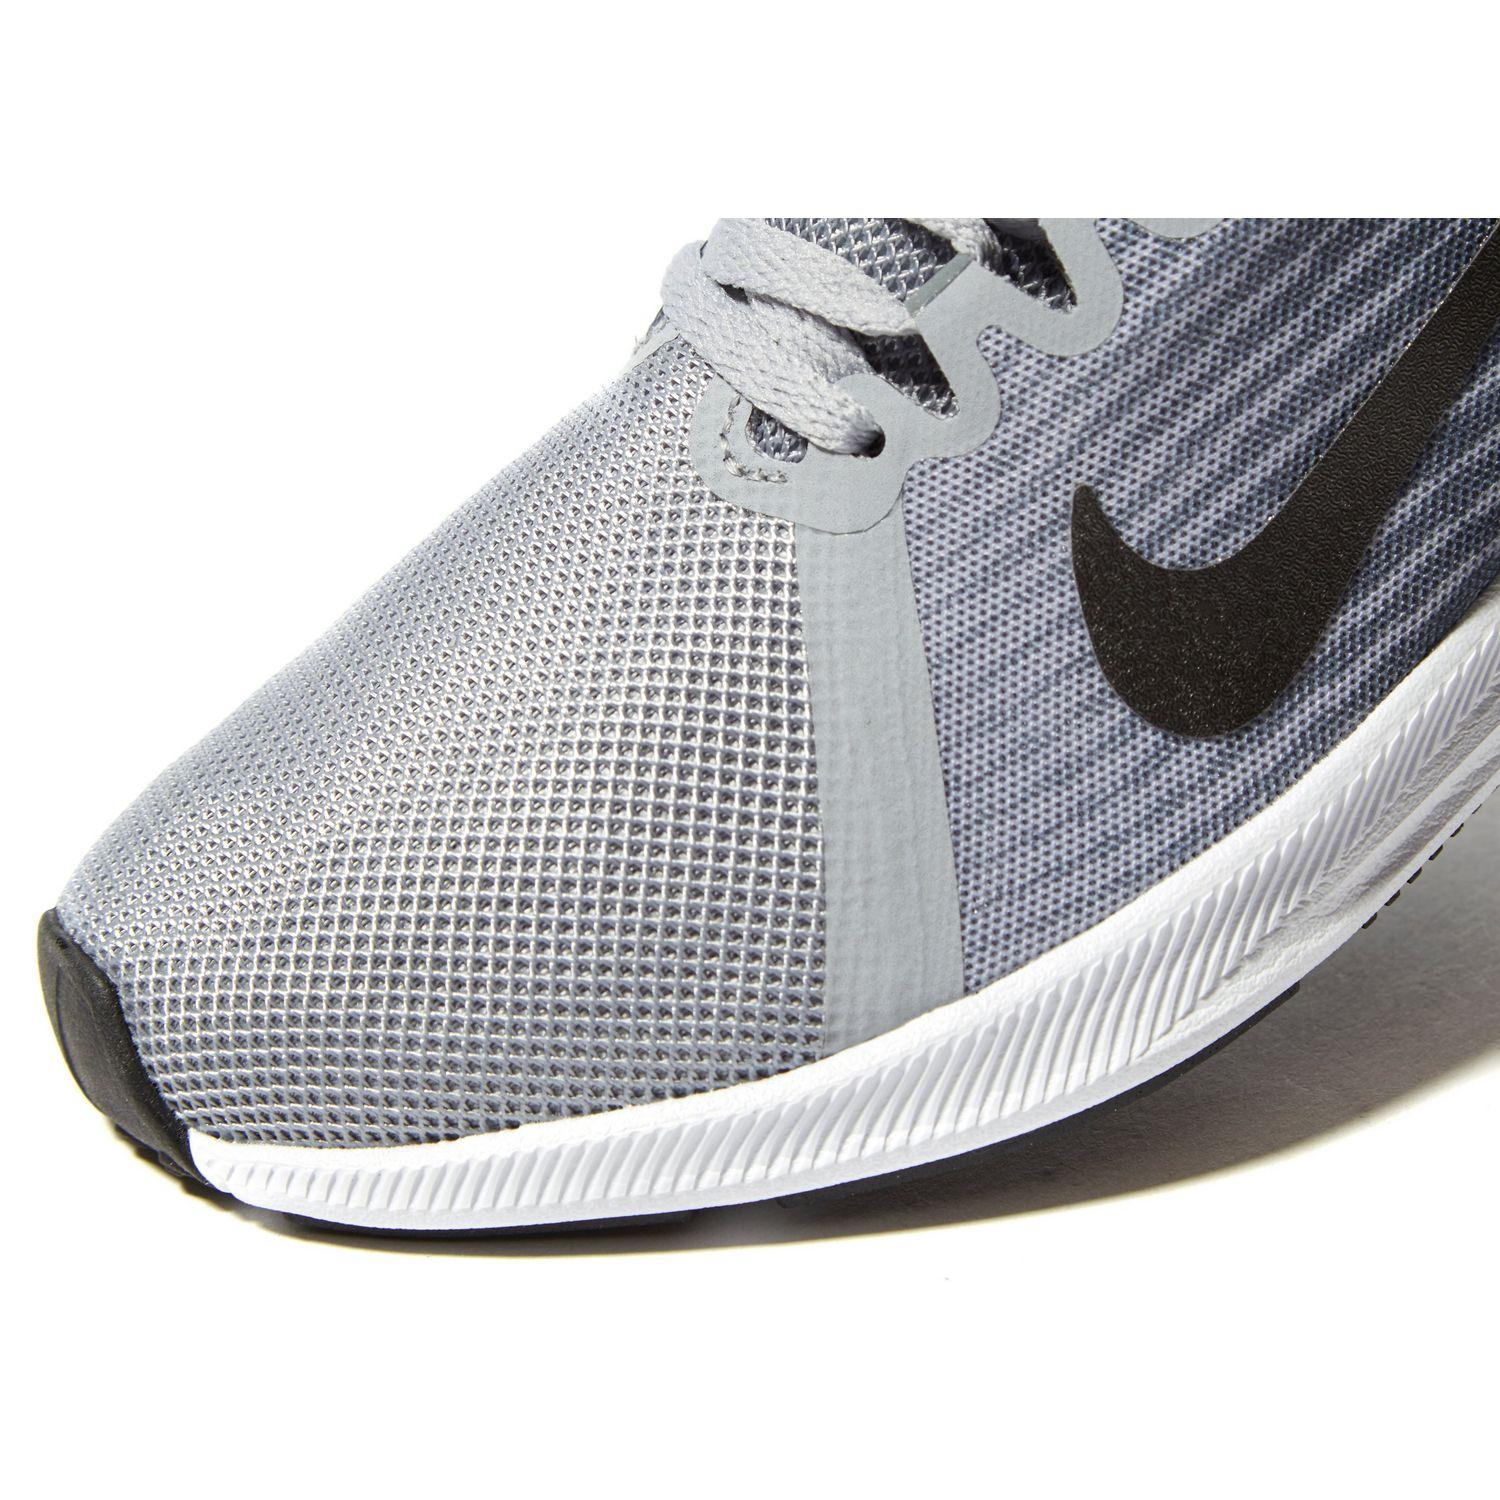 Nike Synthetic Downshifter 7 in Grey (Gray) - Lyst